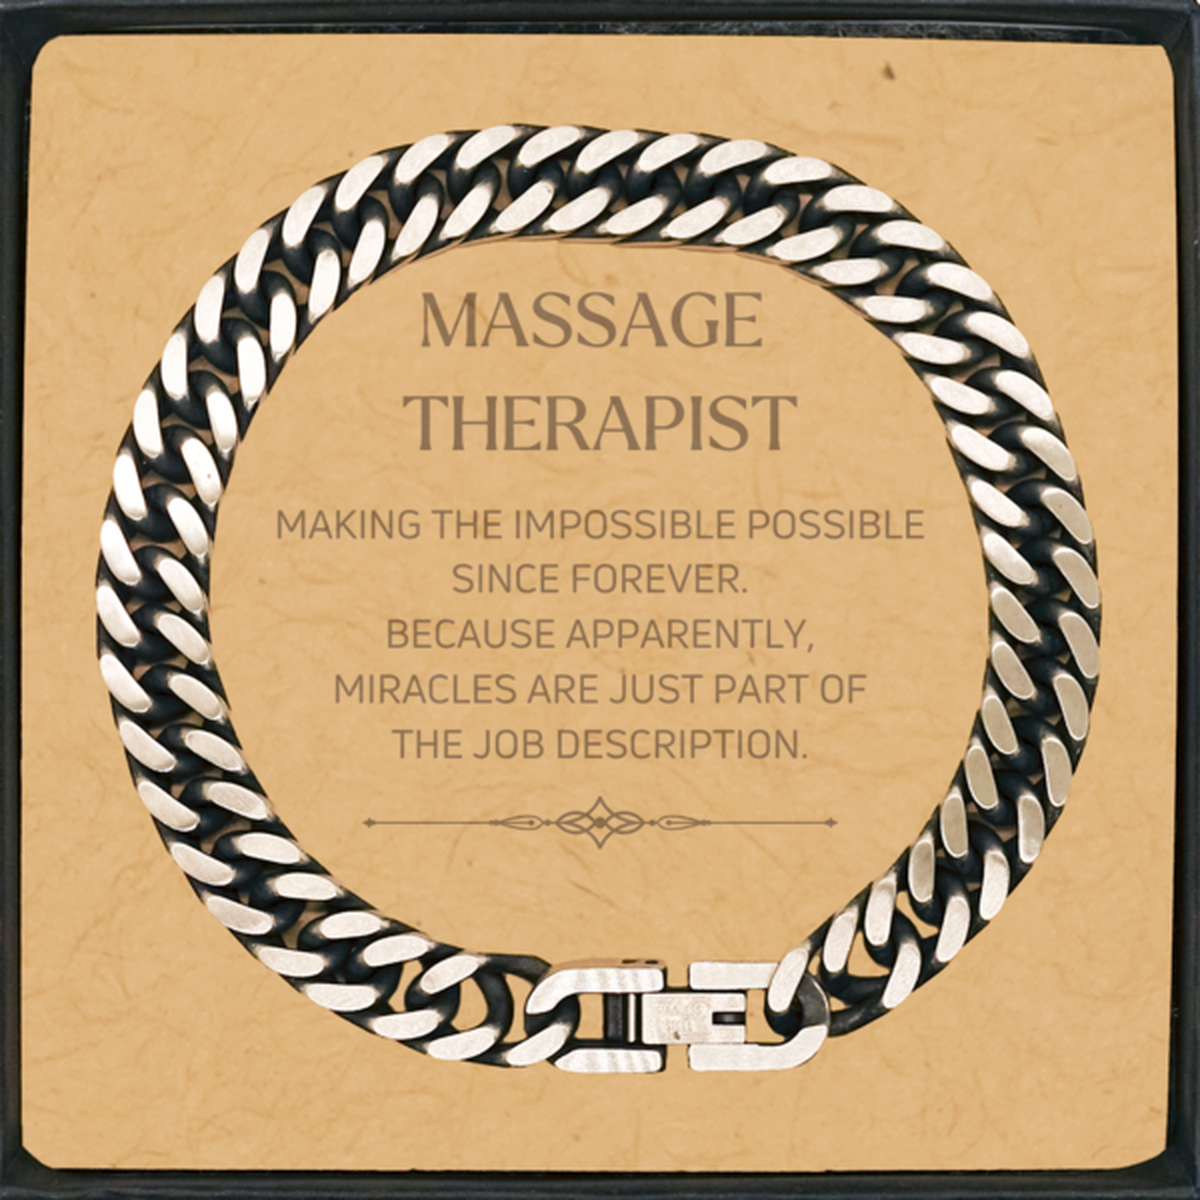 Funny Massage Therapist Gifts, Miracles are just part of the job description, Inspirational Birthday Cuban Link Chain Bracelet For Massage Therapist, Men, Women, Coworkers, Friends, Boss